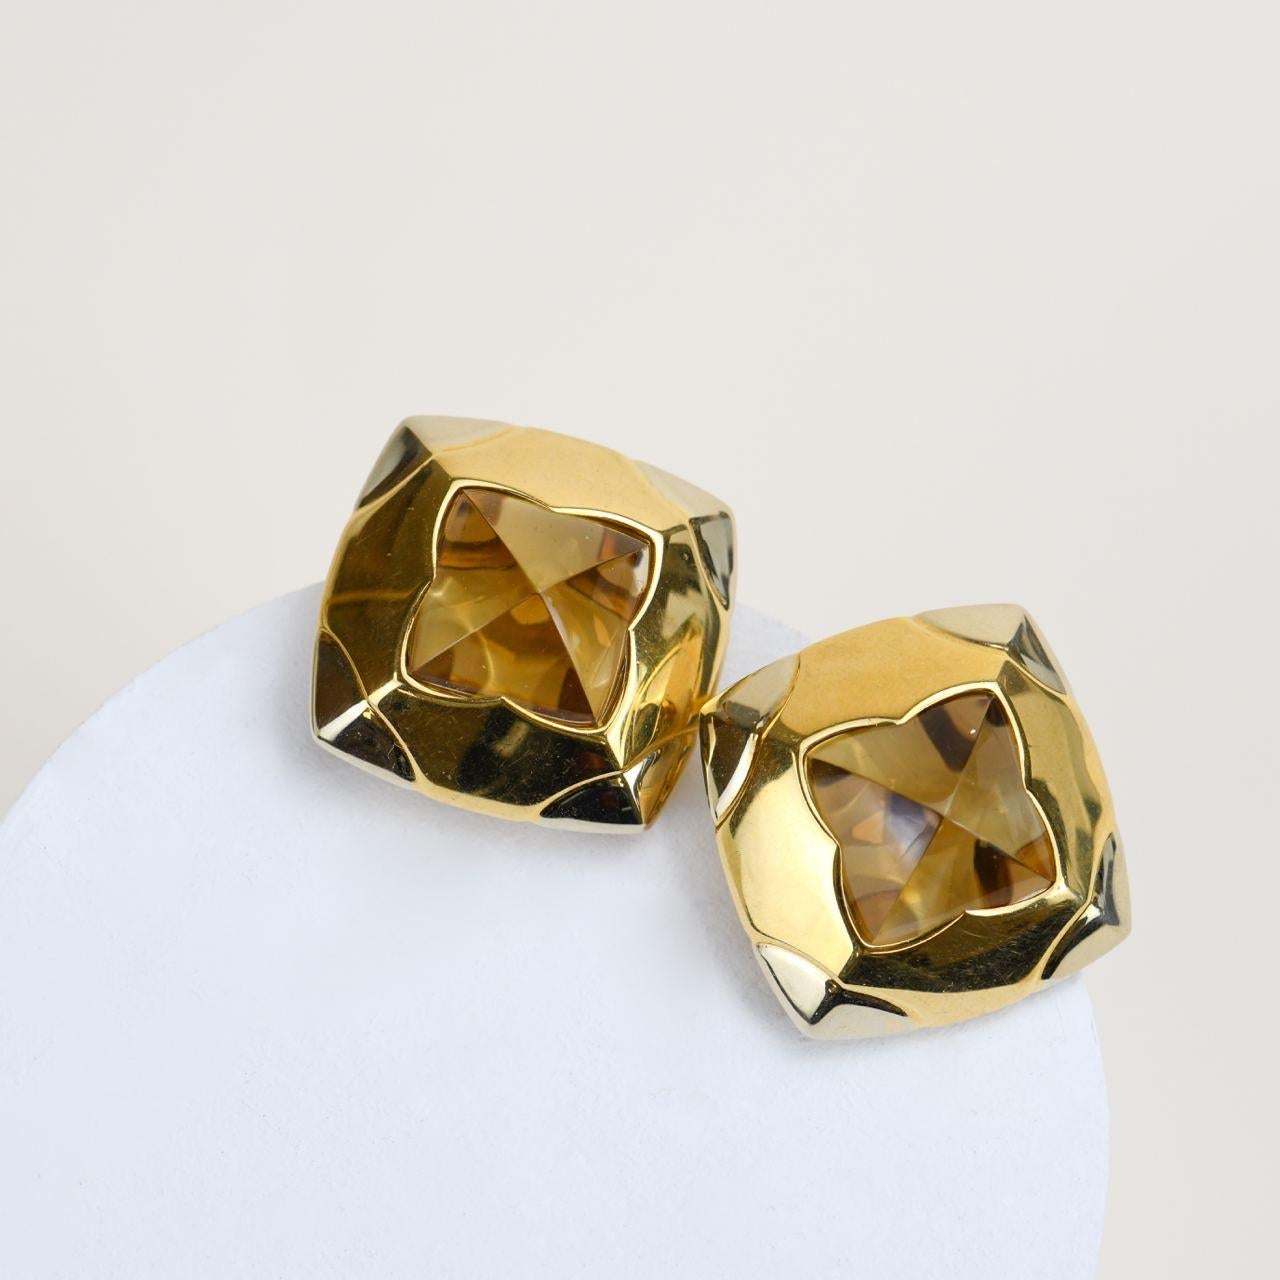 Uncut Bvlgari Pyramide Citrine Yellow Gold Clip-on Earrings For Sale